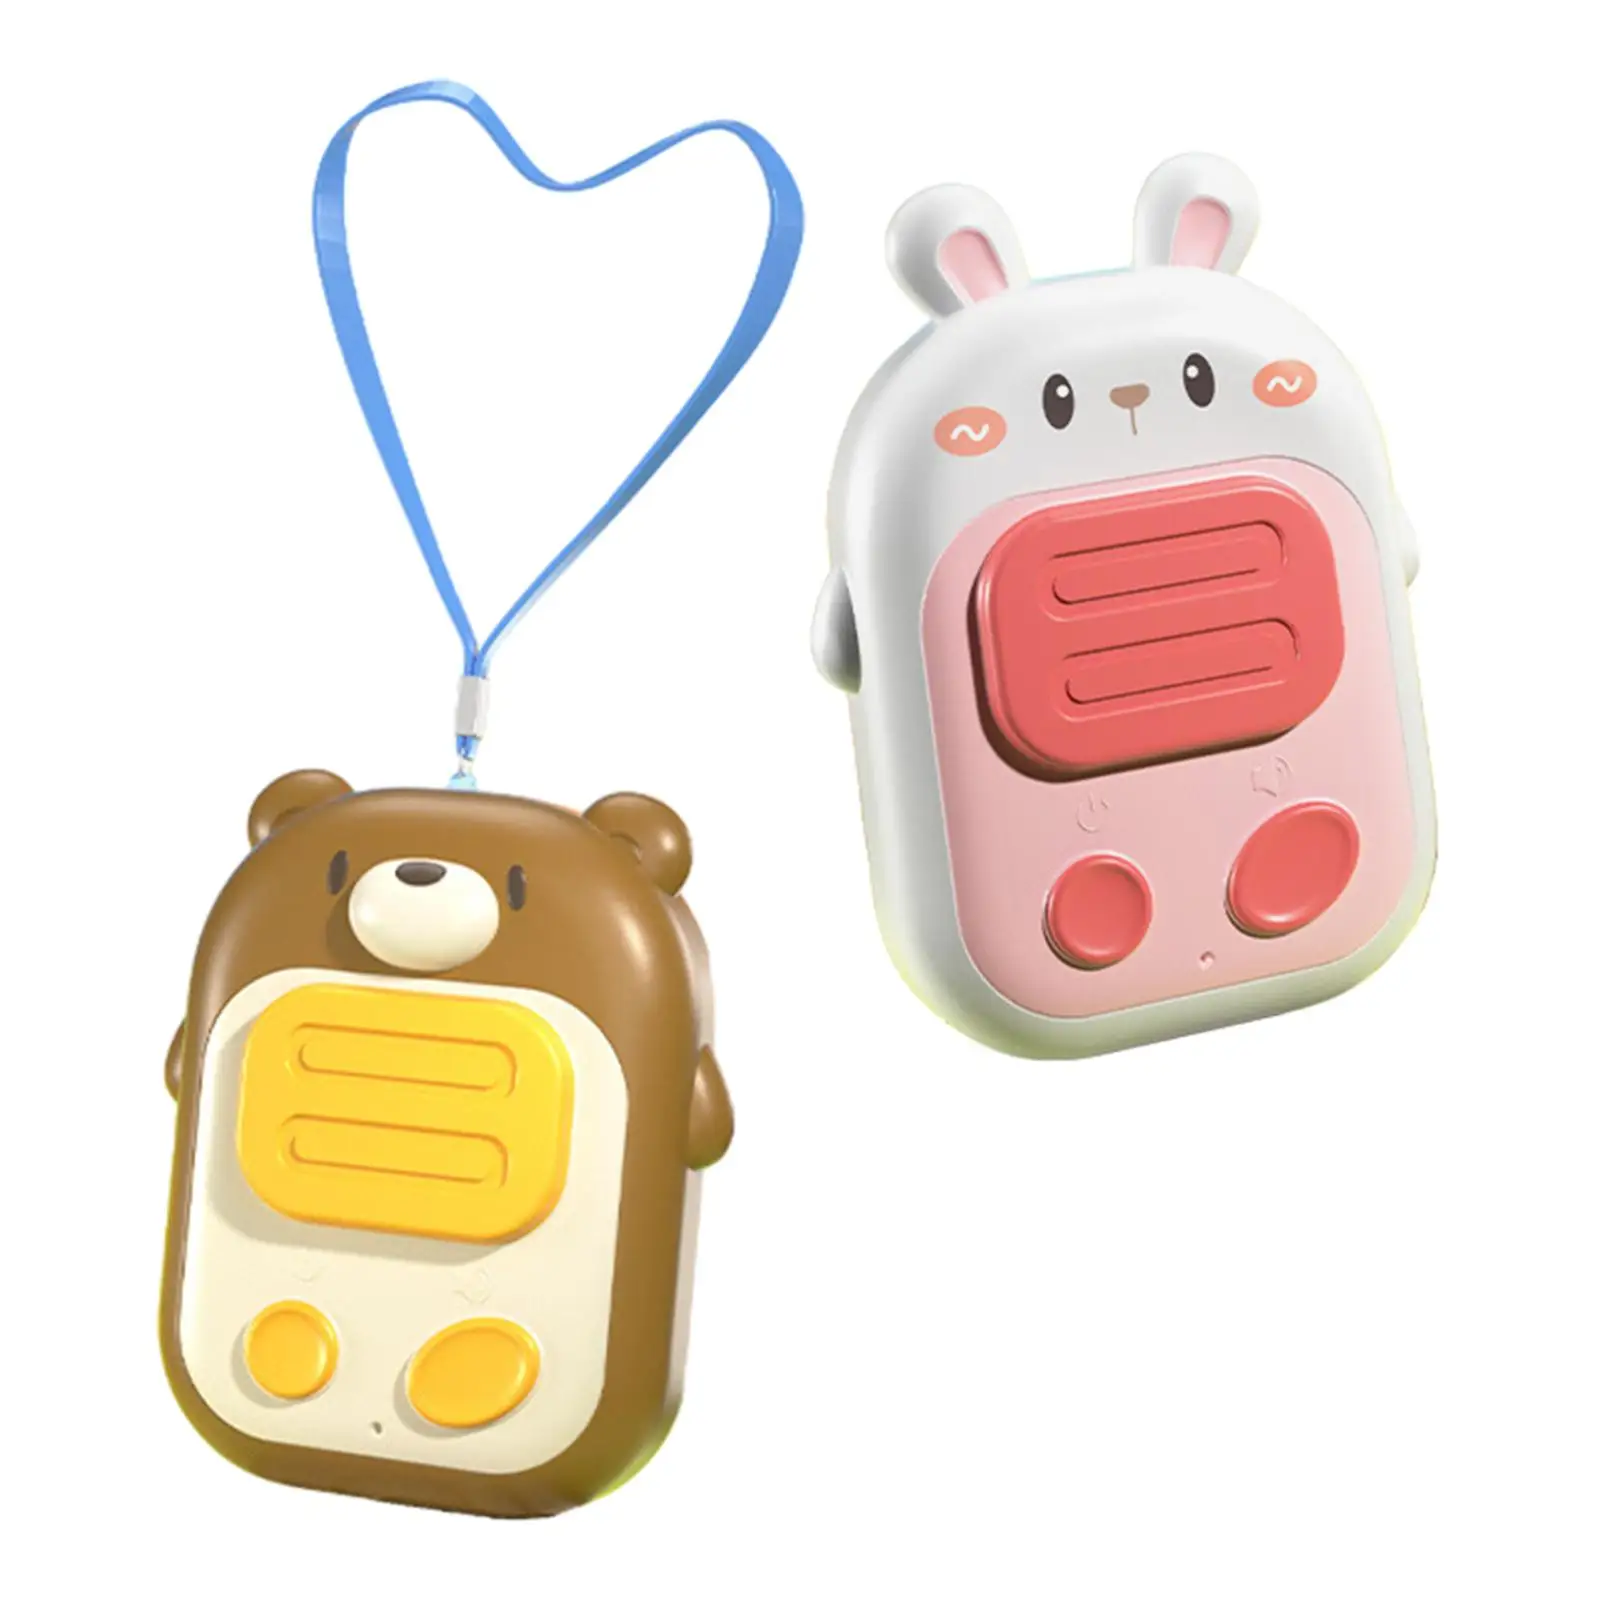 2x Kids Walkie Talkies Mini Electronic Birthday Gift Portable Handheld Kids Toys Cute for Camping Hiking Indoor Outside Children